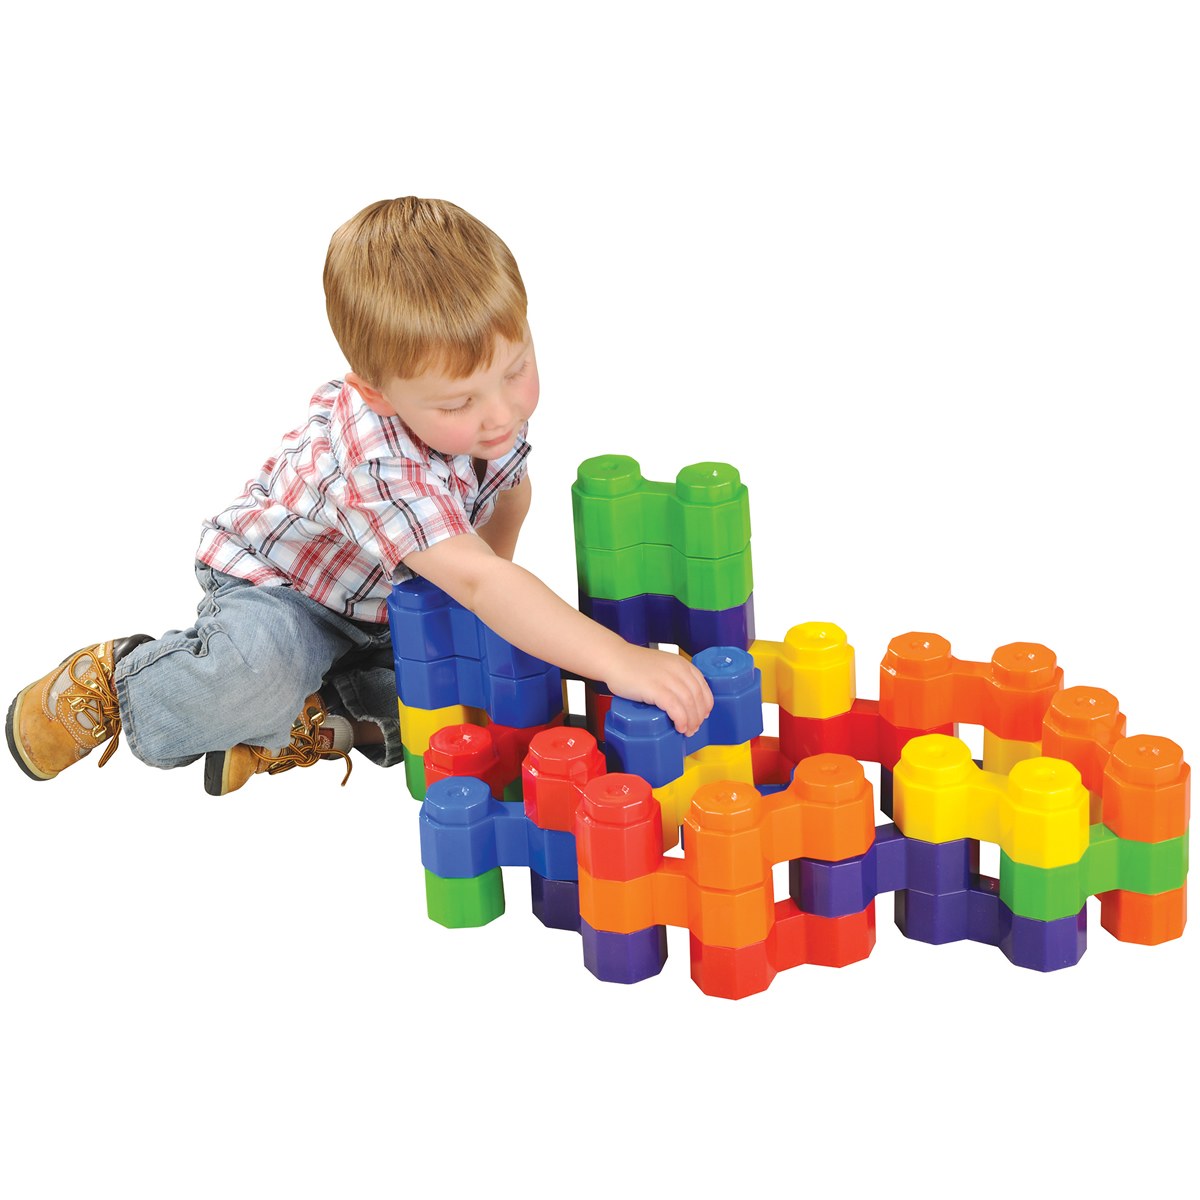 Kaplan Early Learning Company Jumbo Double Octagon Builders - 36 Pieces